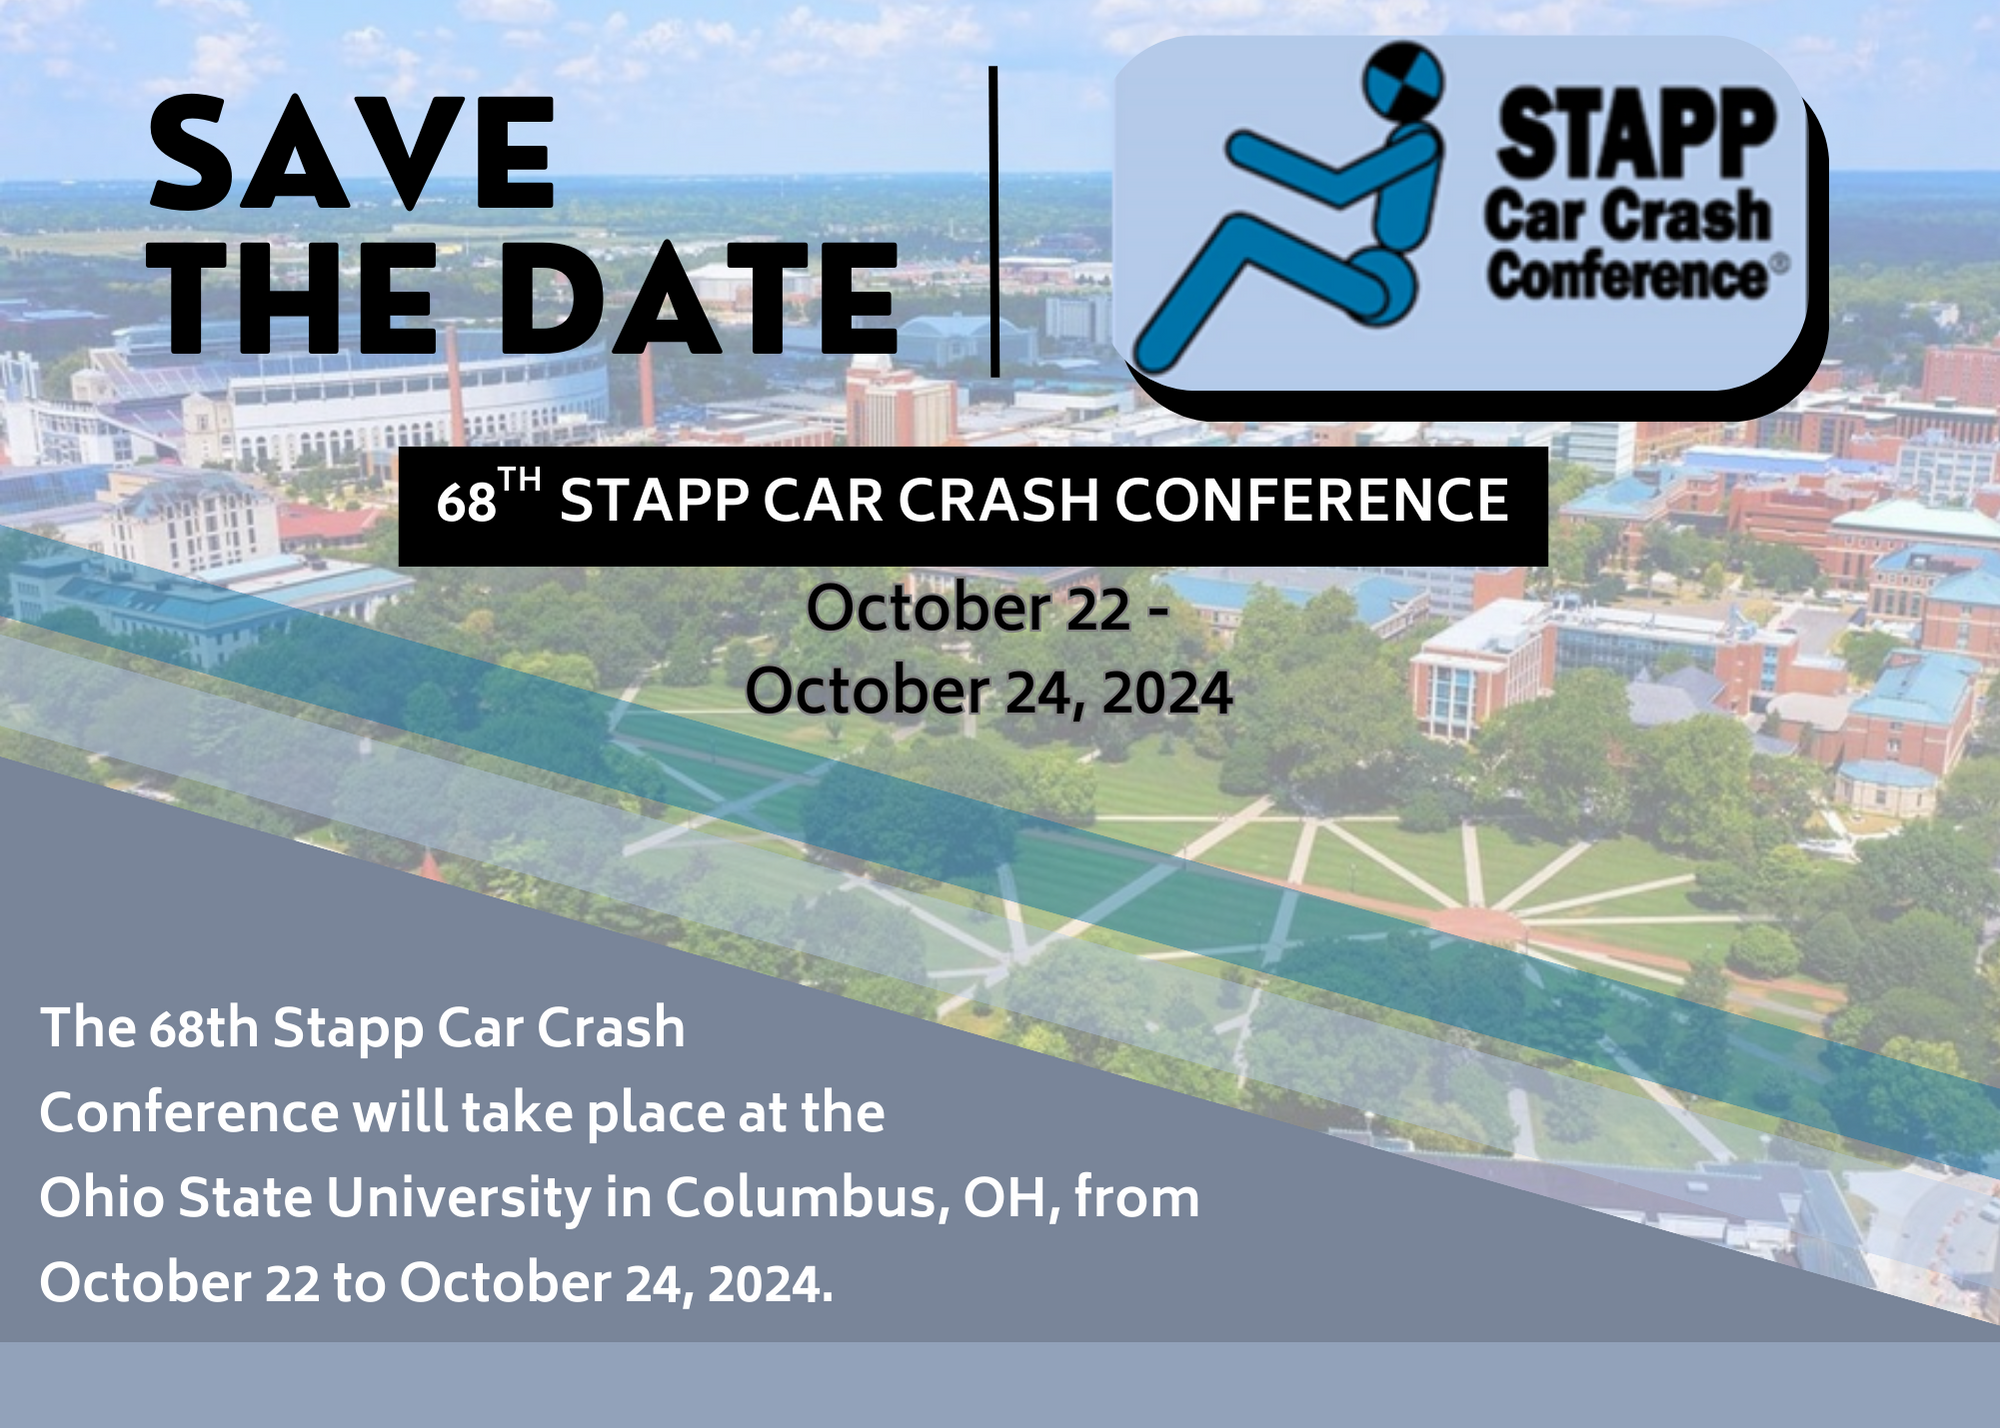 Save the date for the 68th Stapp Car Crash Conference, scheduled for 10/22/24 through 10/24/24